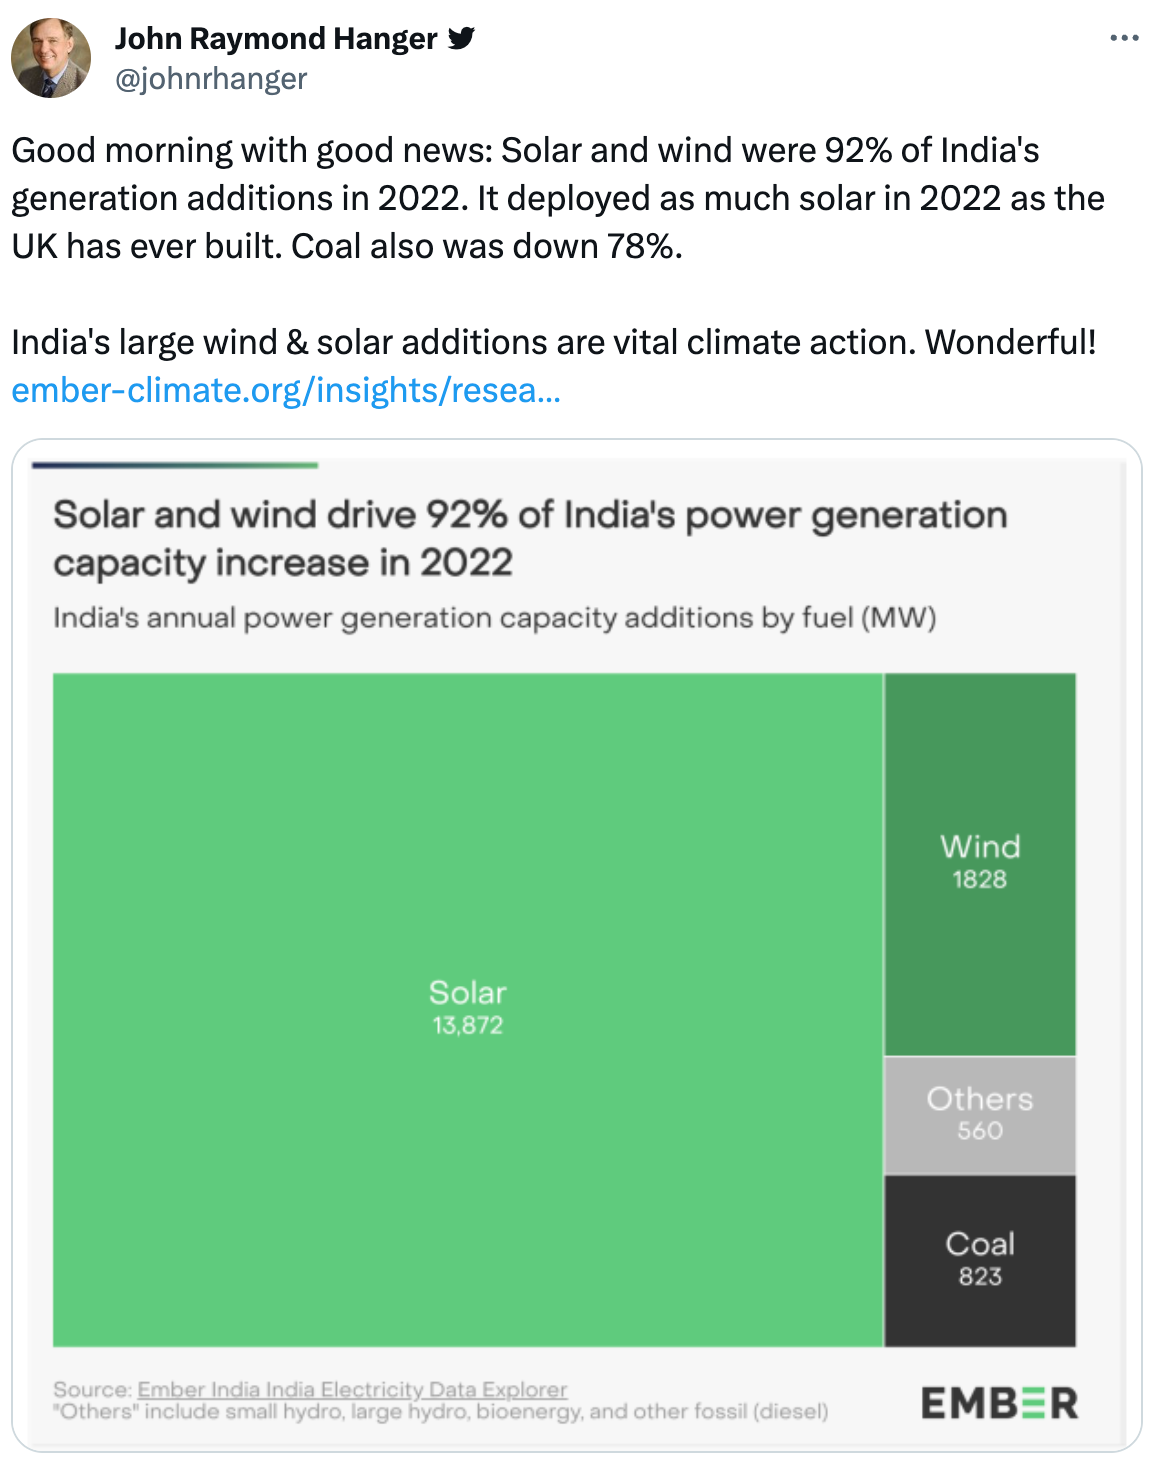  See new posts Conversation John Raymond Hanger  @johnrhanger Good morning with good news: Solar and wind were 92% of India's generation additions in 2022. It deployed as much solar in 2022 as the UK has ever built. Coal also was down 78%.   India's large wind & solar additions are vital climate action. Wonderful! https://ember-climate.org/insights/research/india-data-story-2023/#supporting-material